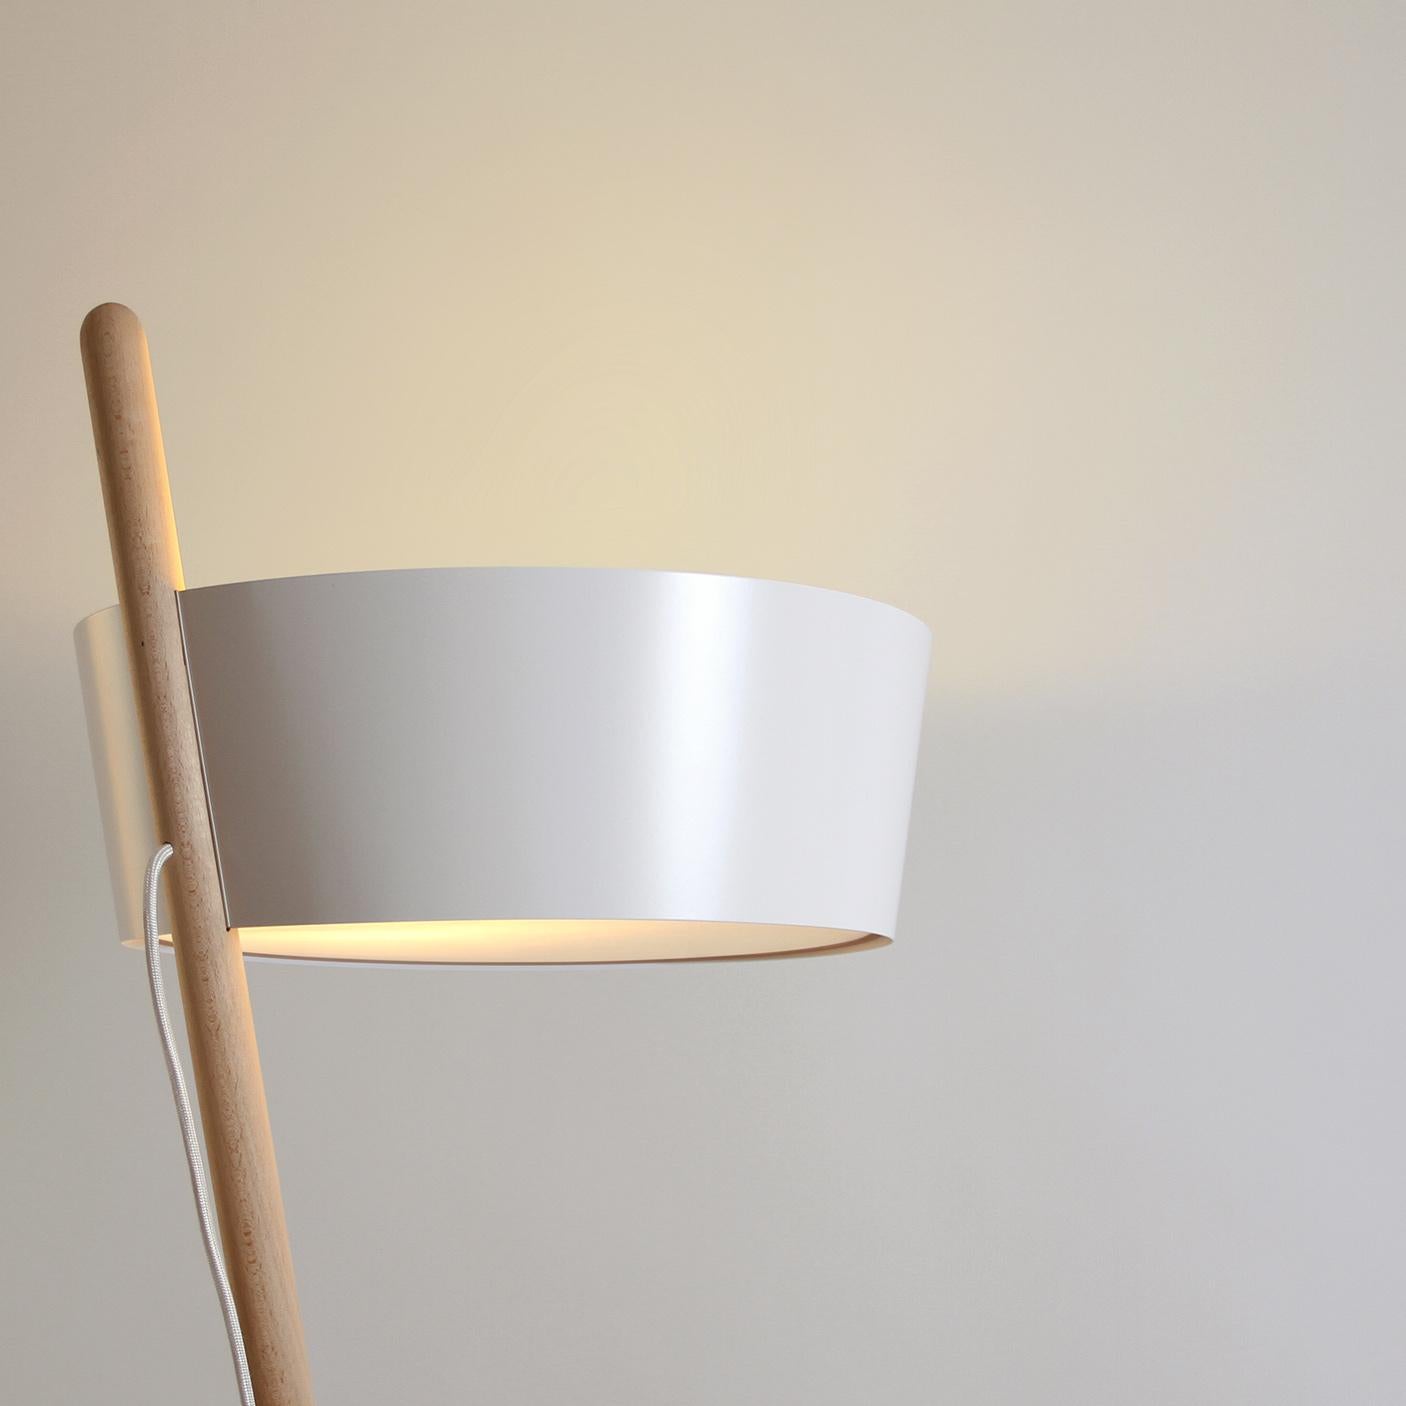 Ka XL ambient floor lamp with tray · White & beech In New Condition For Sale In Madrid, Madrid